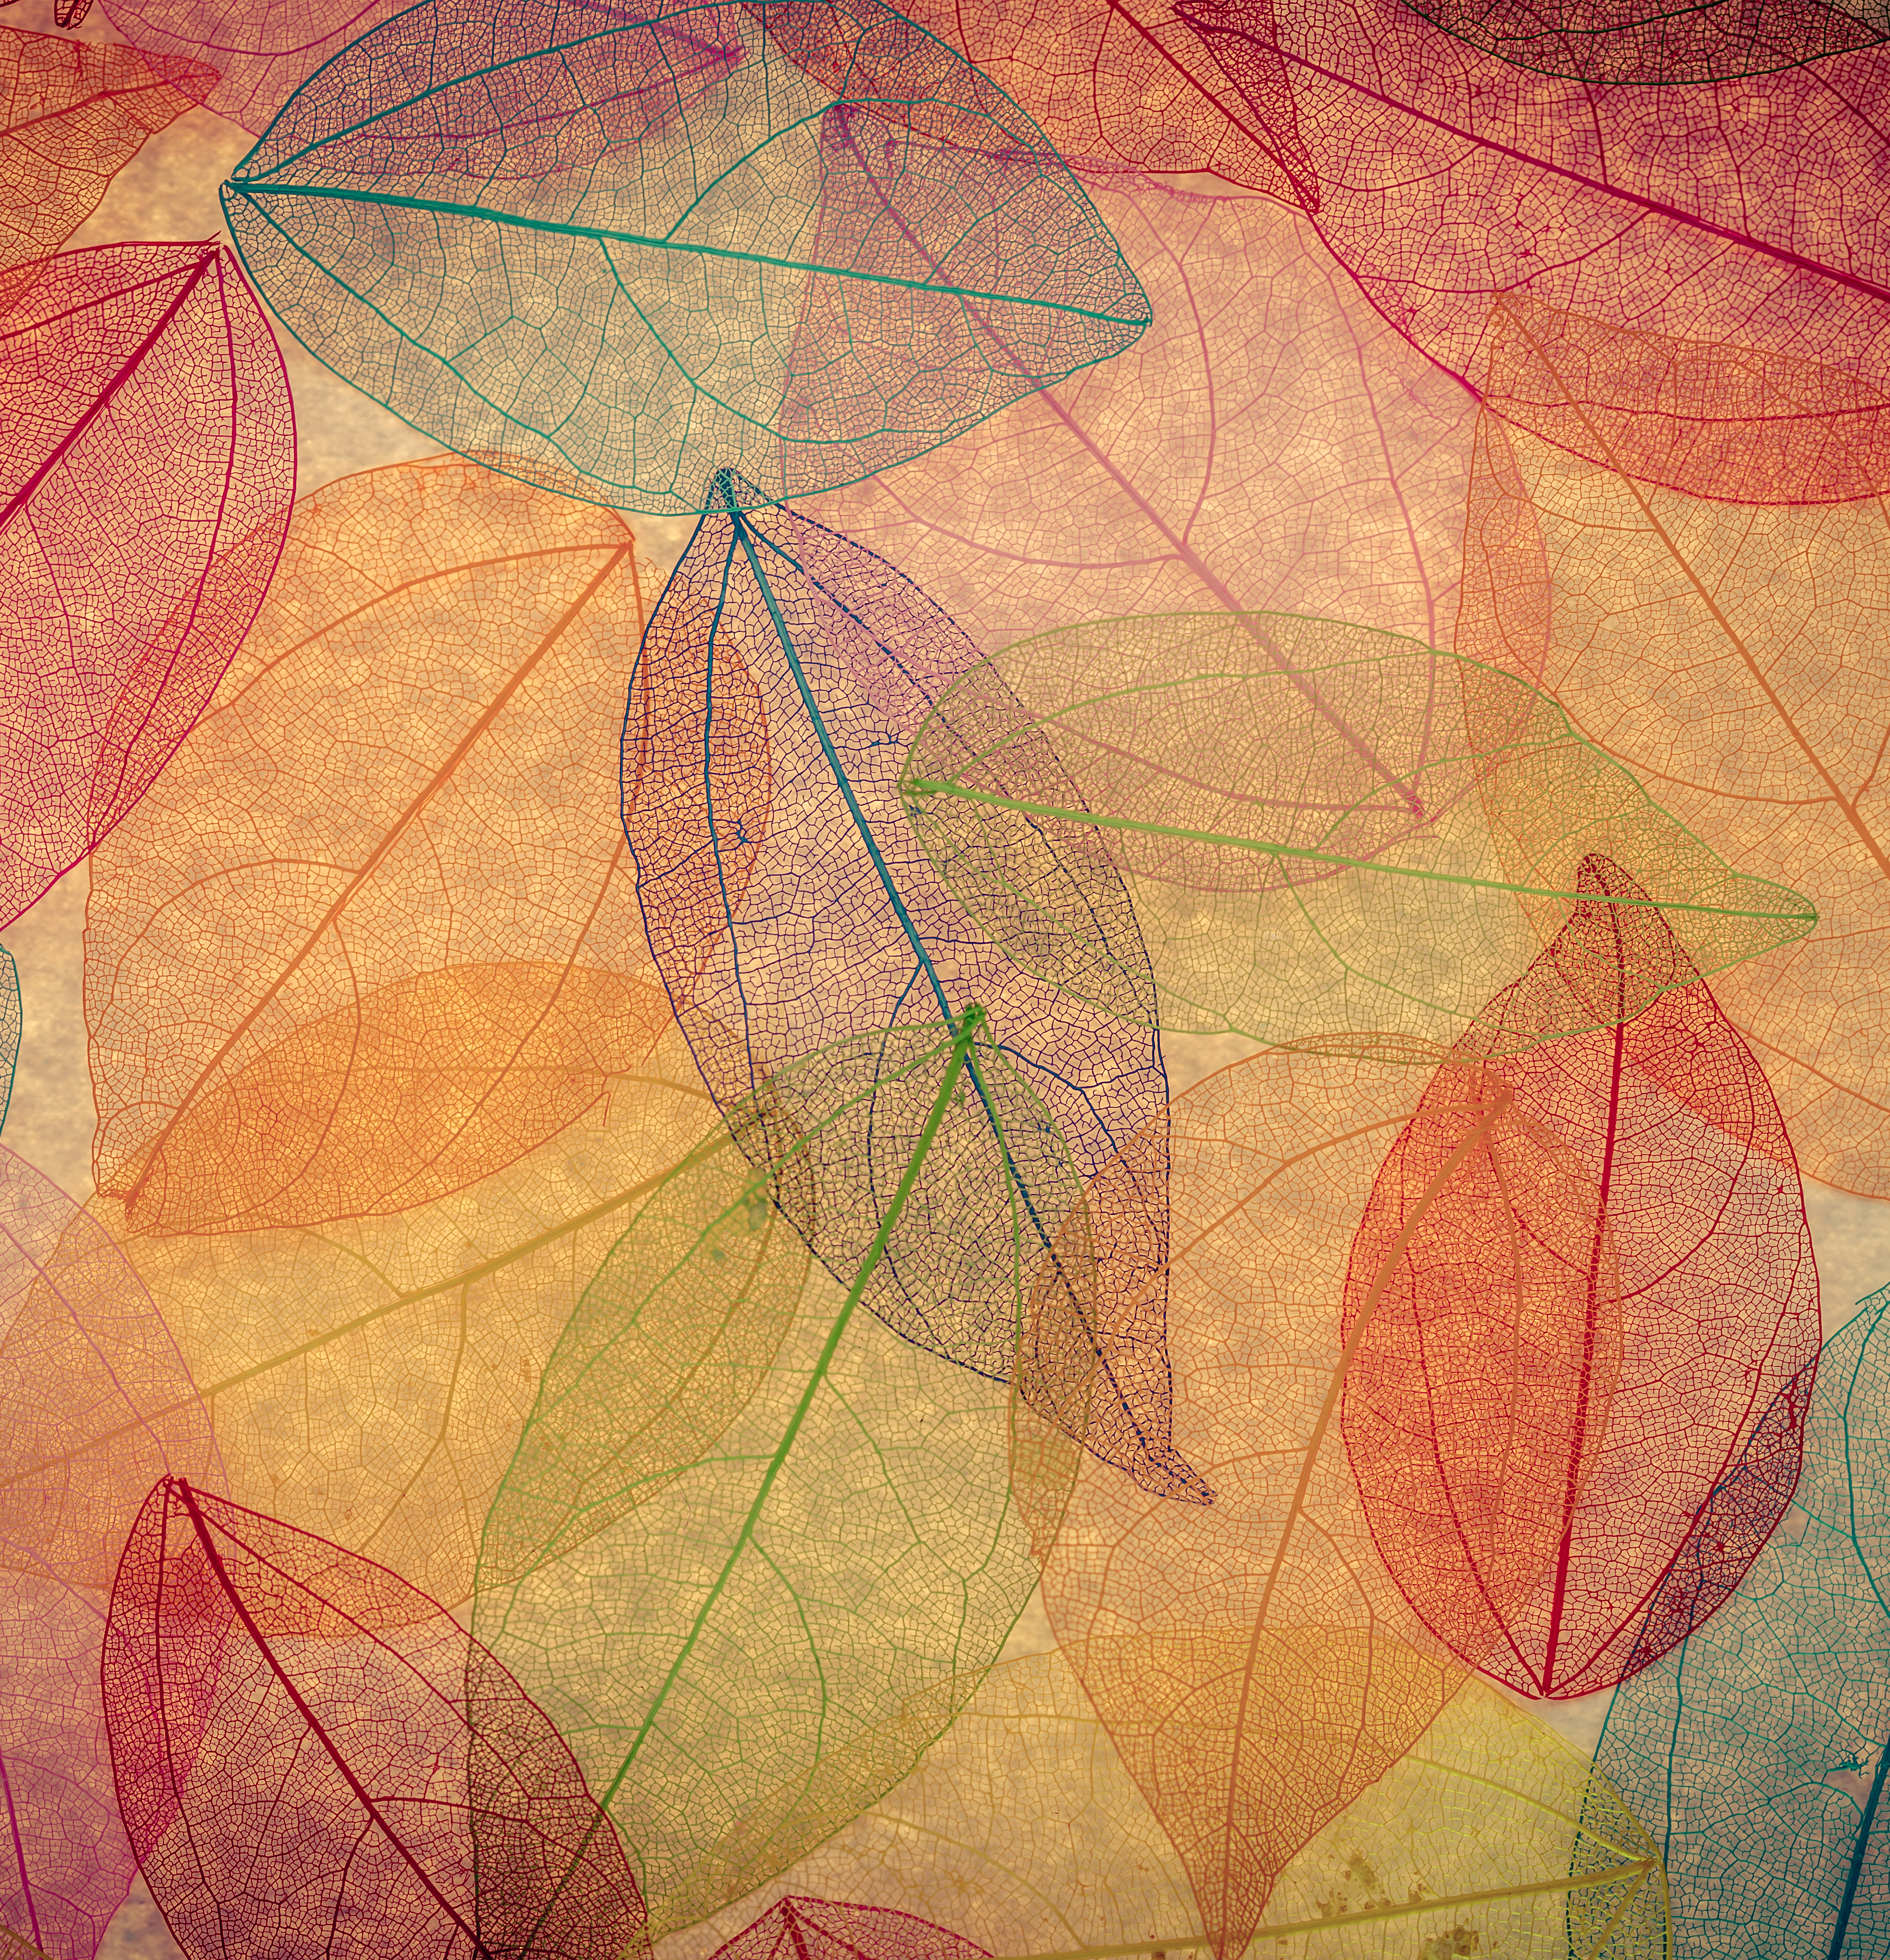 colourful leaves